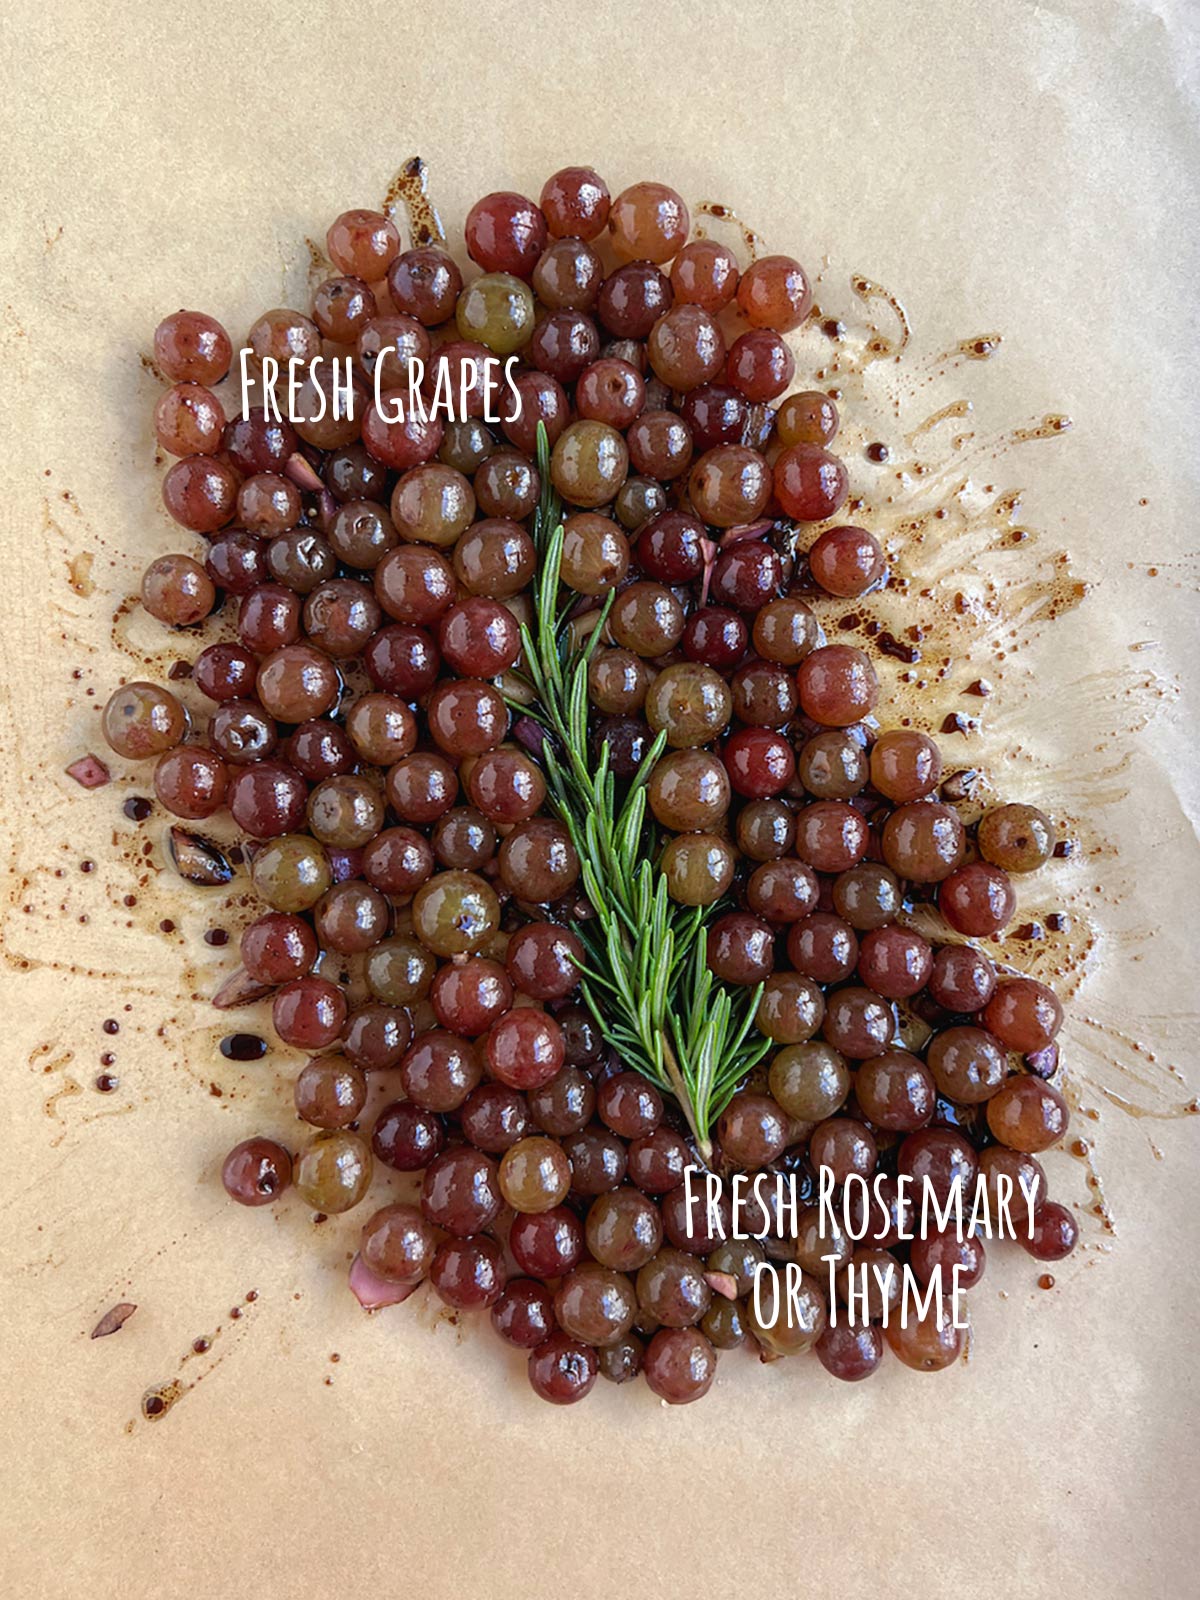 Ingredient shot for baked grapes showing fresh grapes and fresh rosemary on parchment paper.